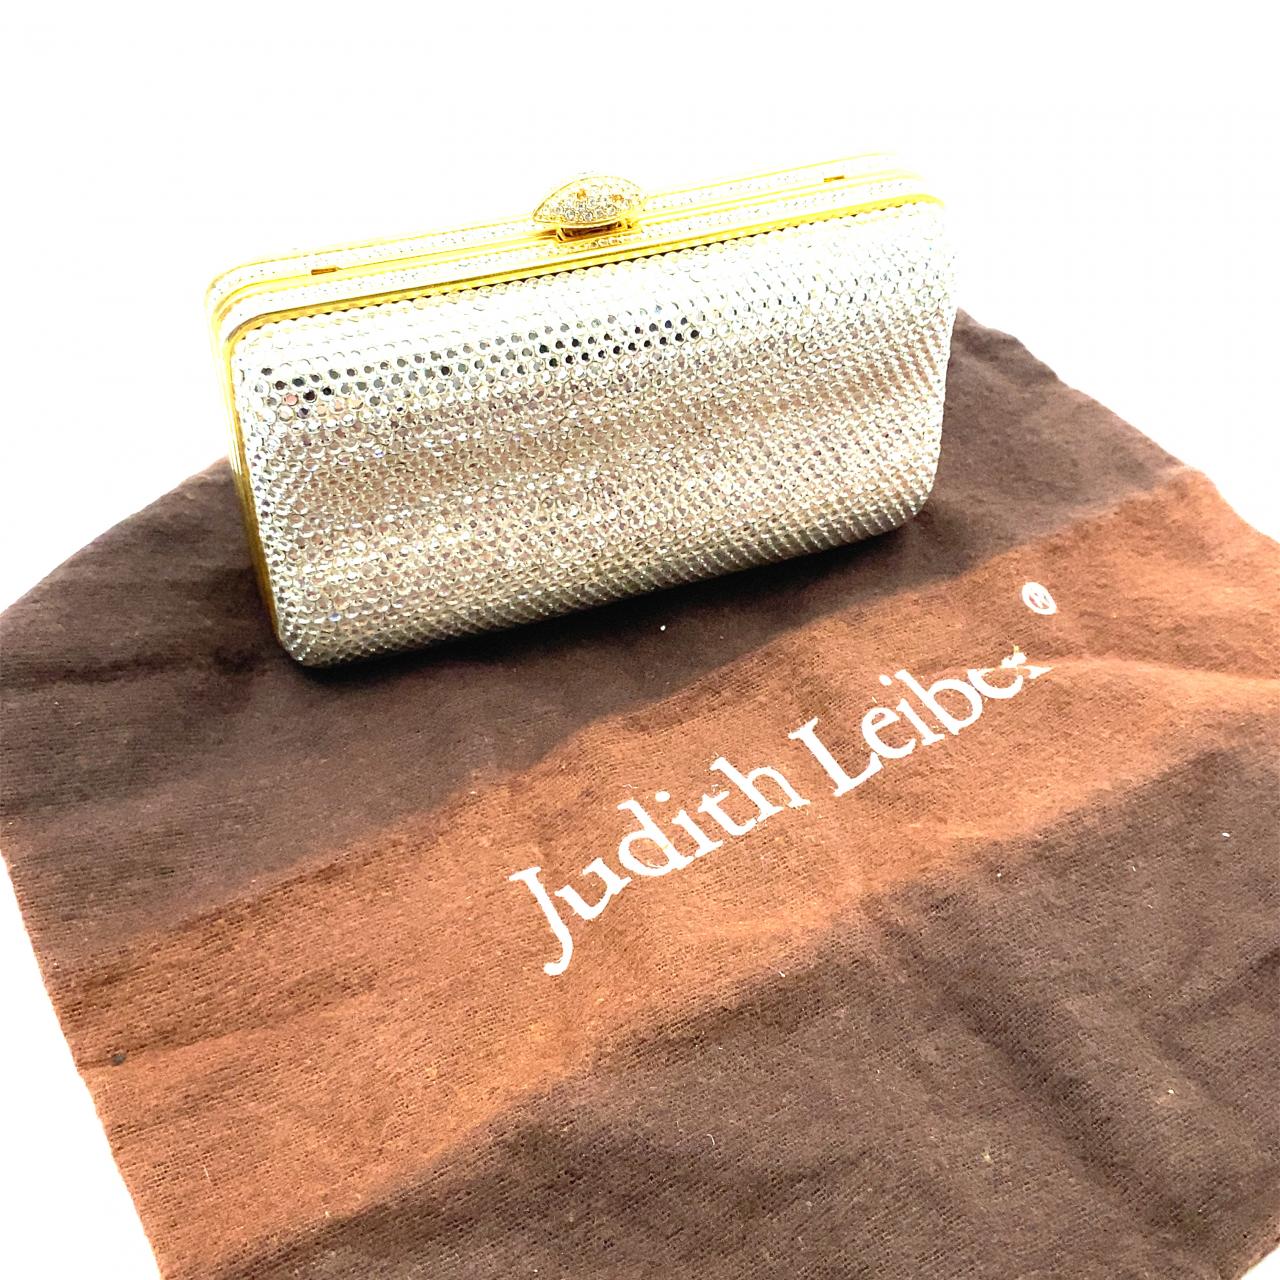 Judith Leiber French Poodle Crystal Clutch Bag - ShopStyle